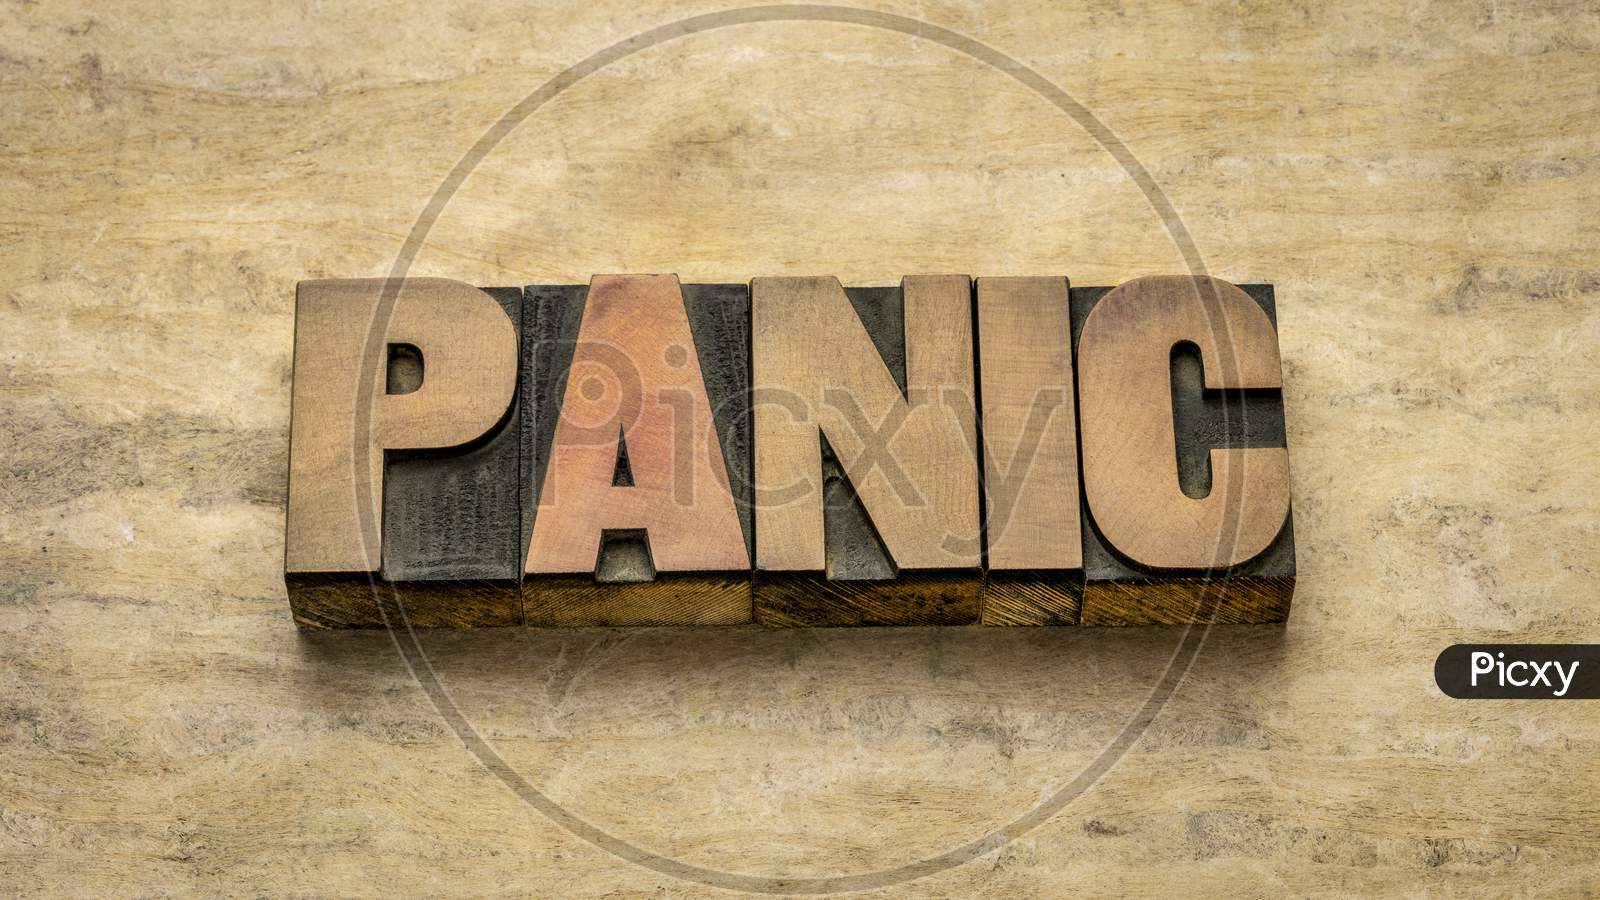 Panic Word Abstract In Vintage Letterpress Wood Type Against Grunge Handmade Paper, Sudden Uncontrollable Fear Or Anxiety